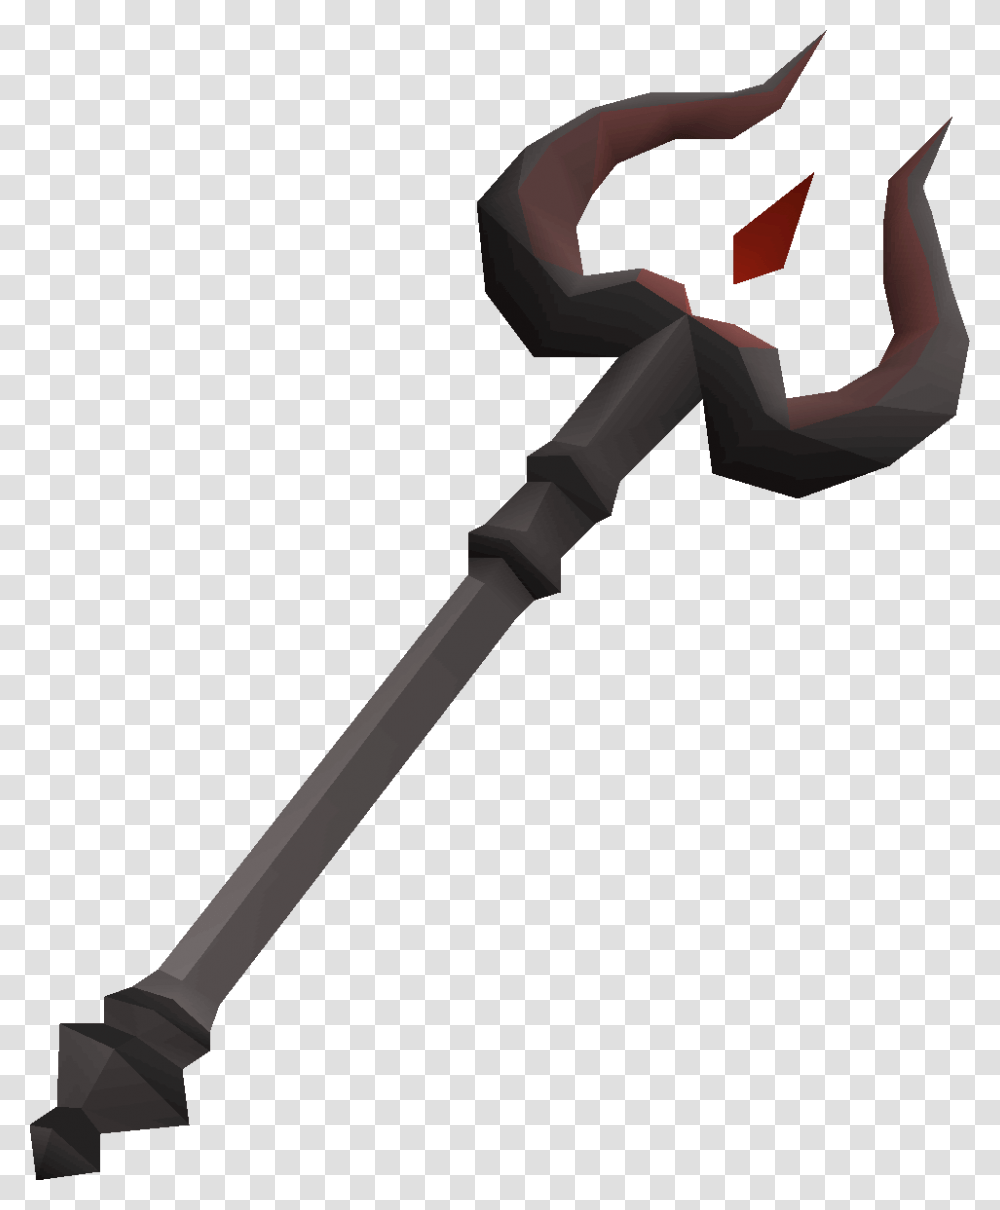 Demon Scepter, Sword, Blade, Weapon, Weaponry Transparent Png